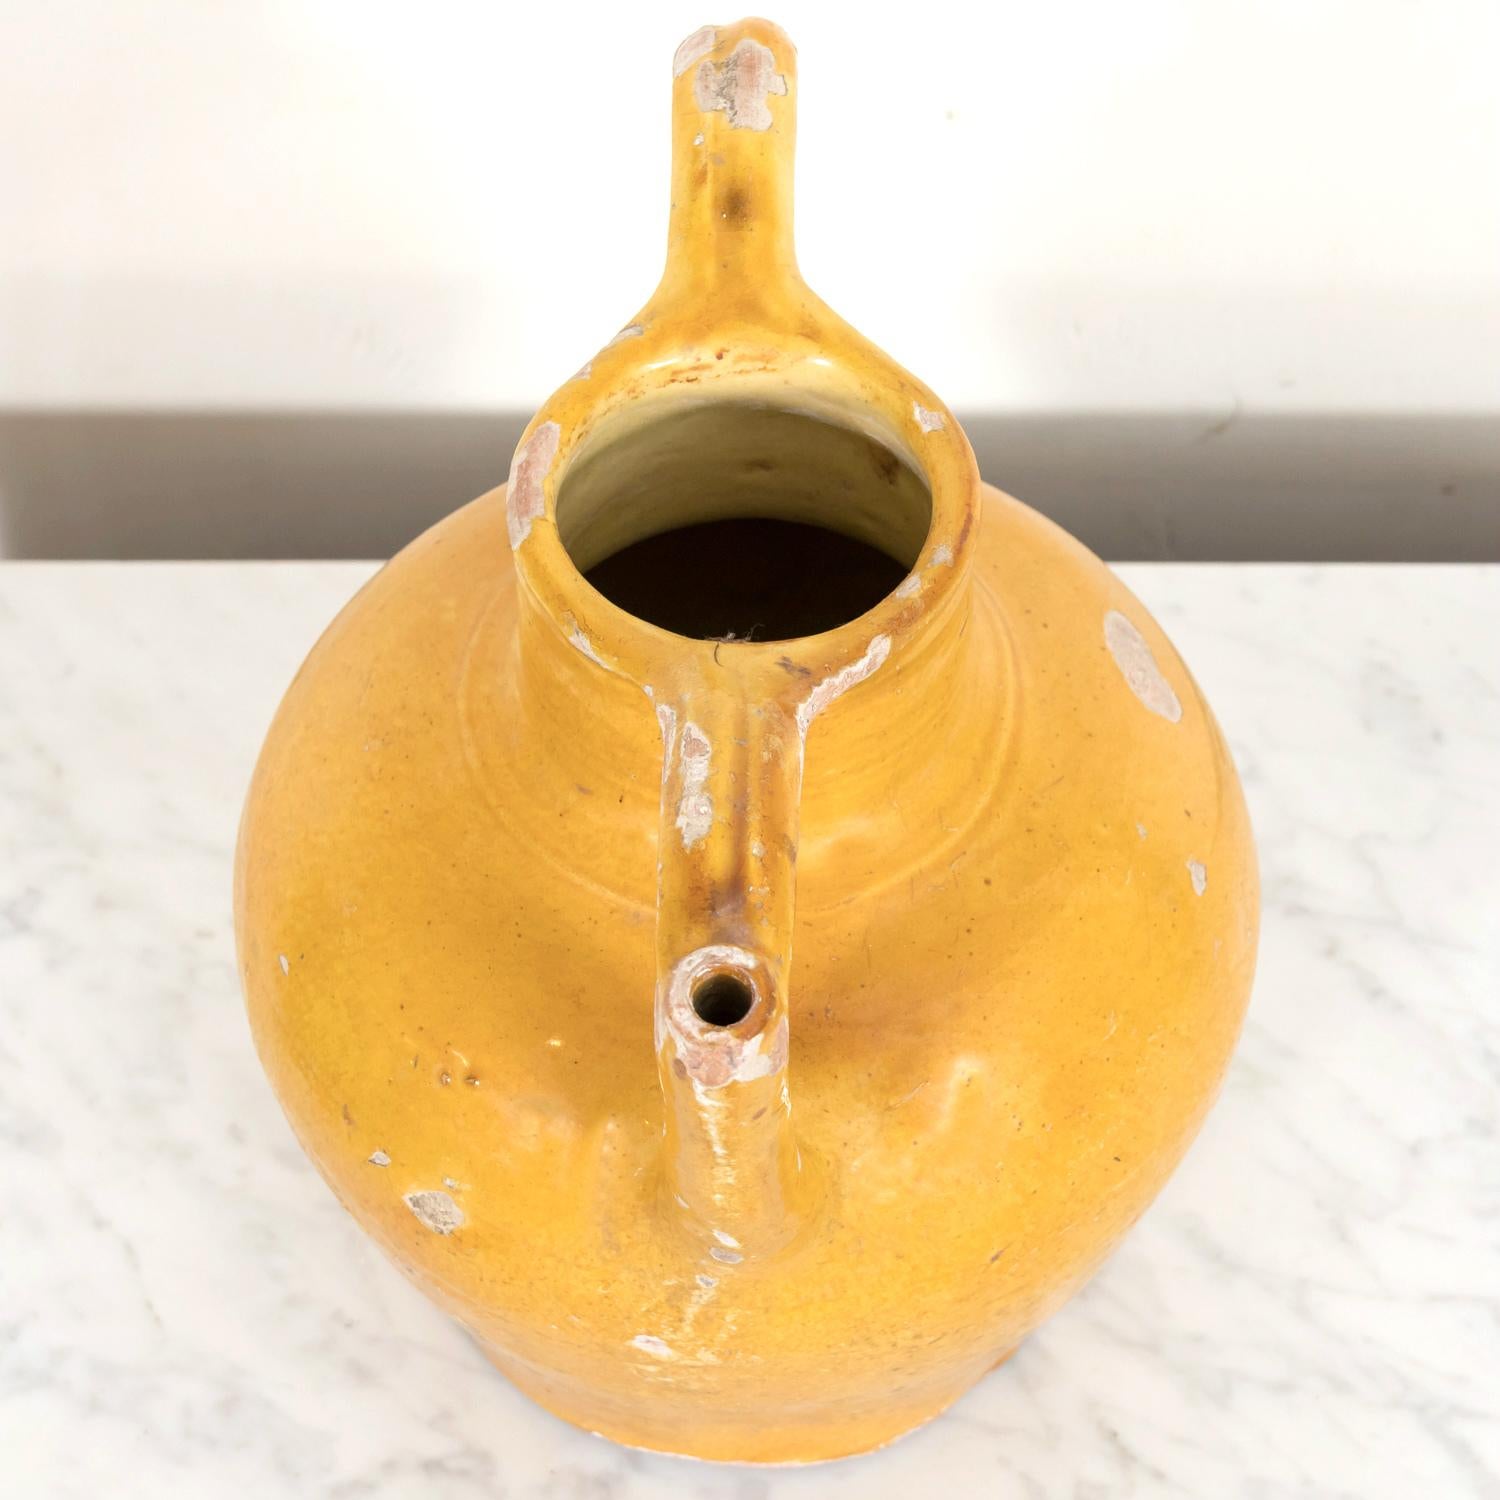 19th Century Antique French Cruche Orjol or Water Jug with Mustard Yellow Glaze For Sale 3